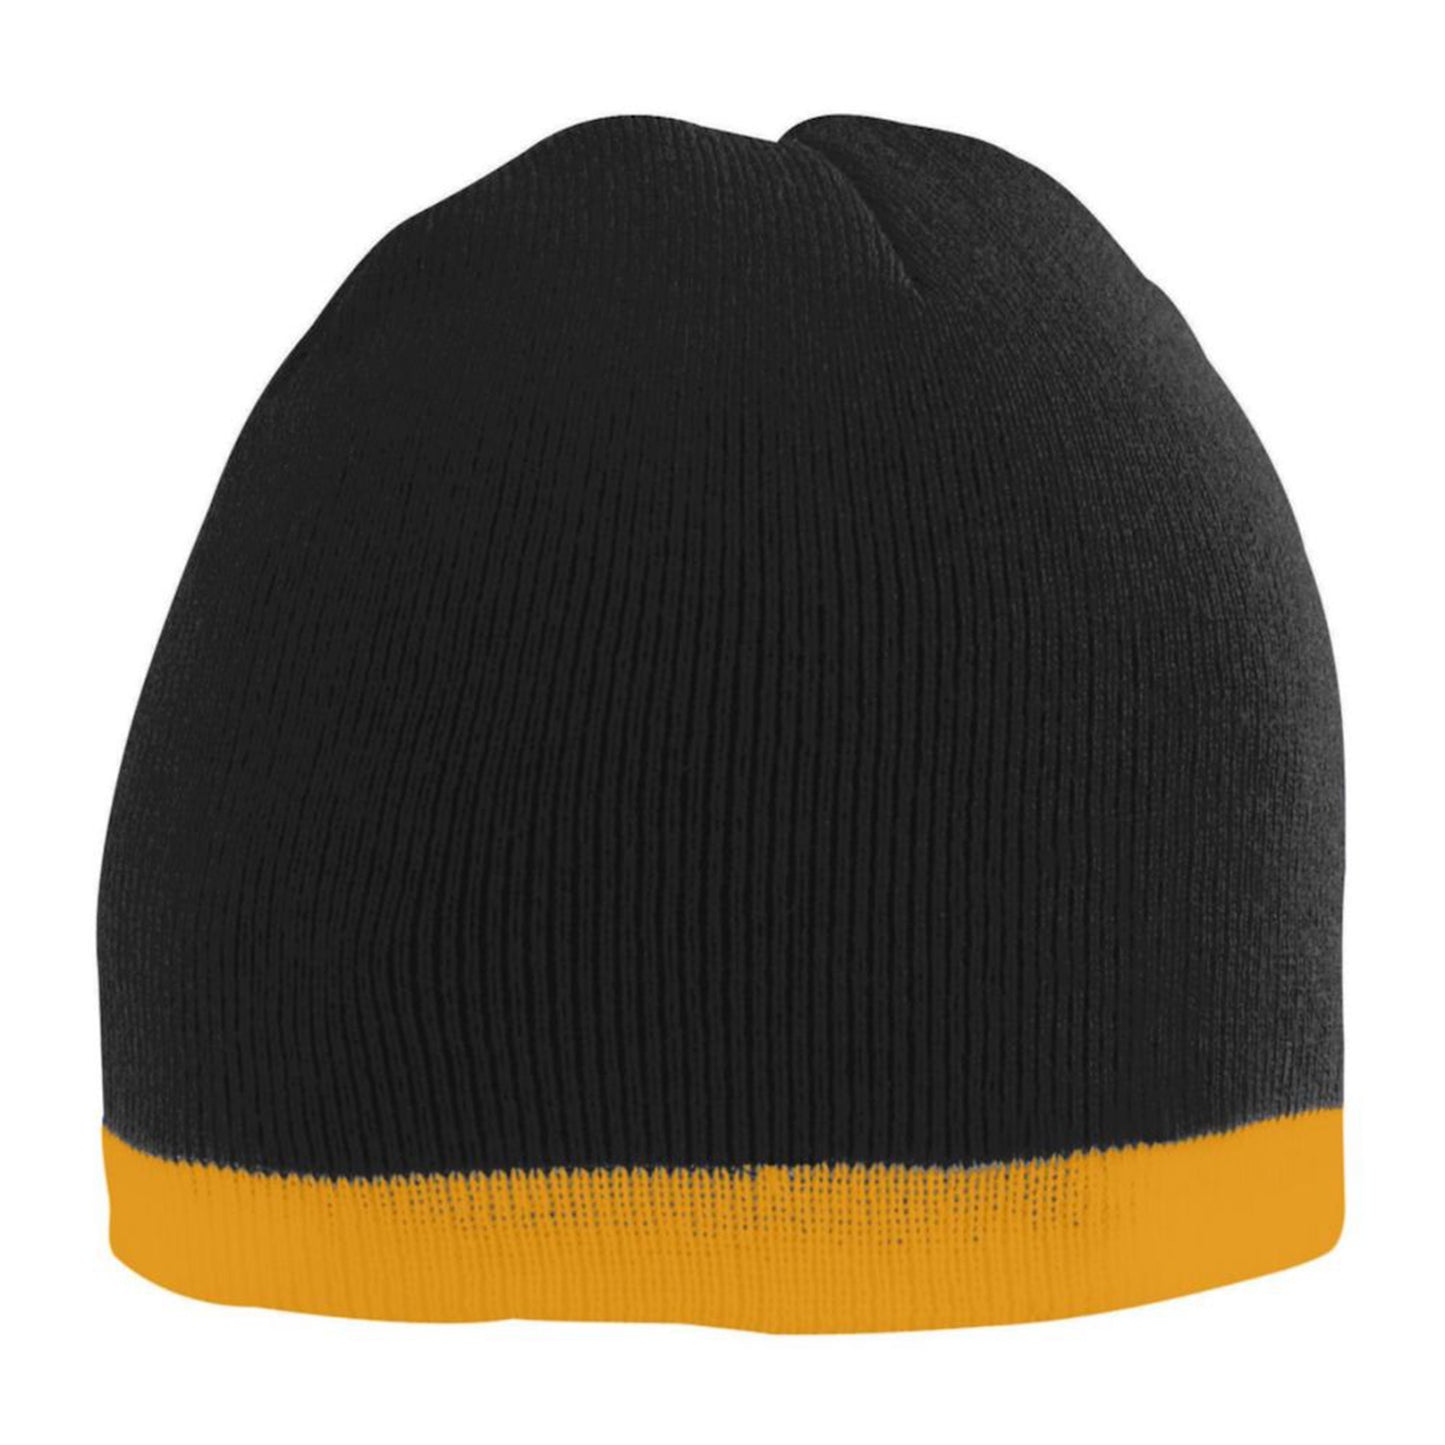 TWO TONED KNIT BEANIE 6820